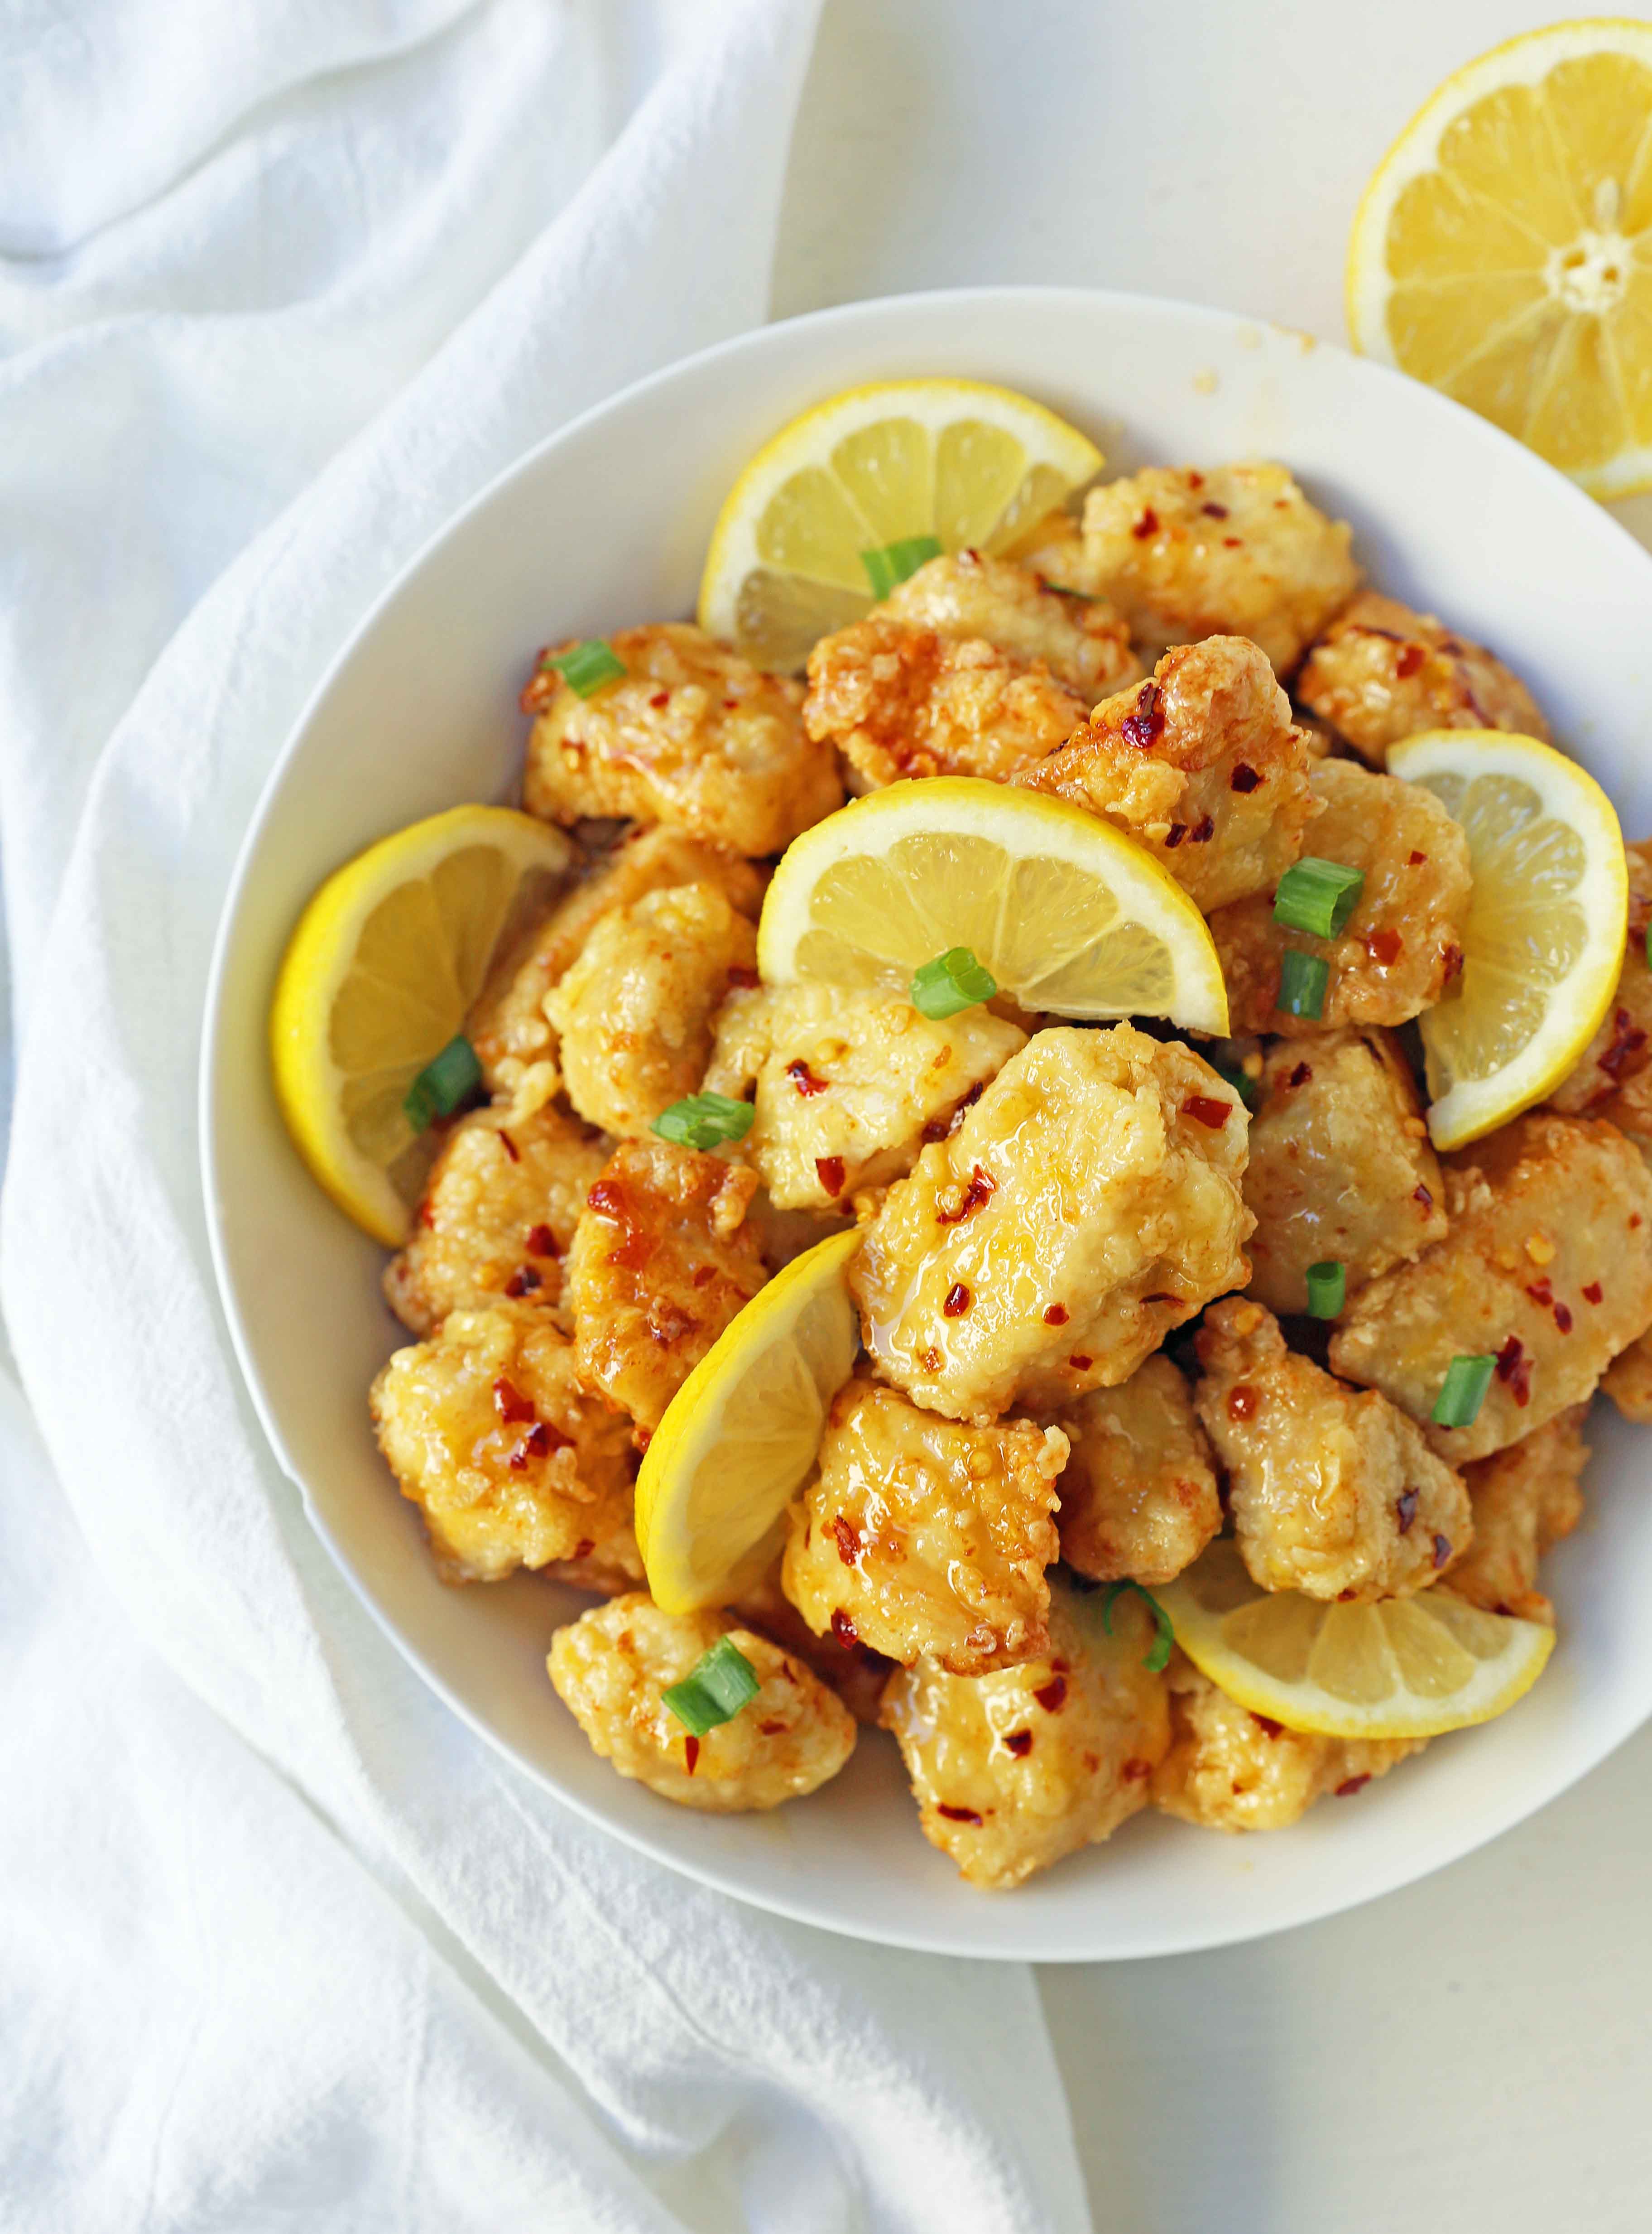 Chinese Lemon Chicken made with crispy fried chicken covered in an authentic, fresh lemon sauce. The ultimate Chinese Lemon Chicken Recipe which is way better than take-out. www.modernhoney.com #chinesefood #asianfood #lemonchicken #chineselemonchicken